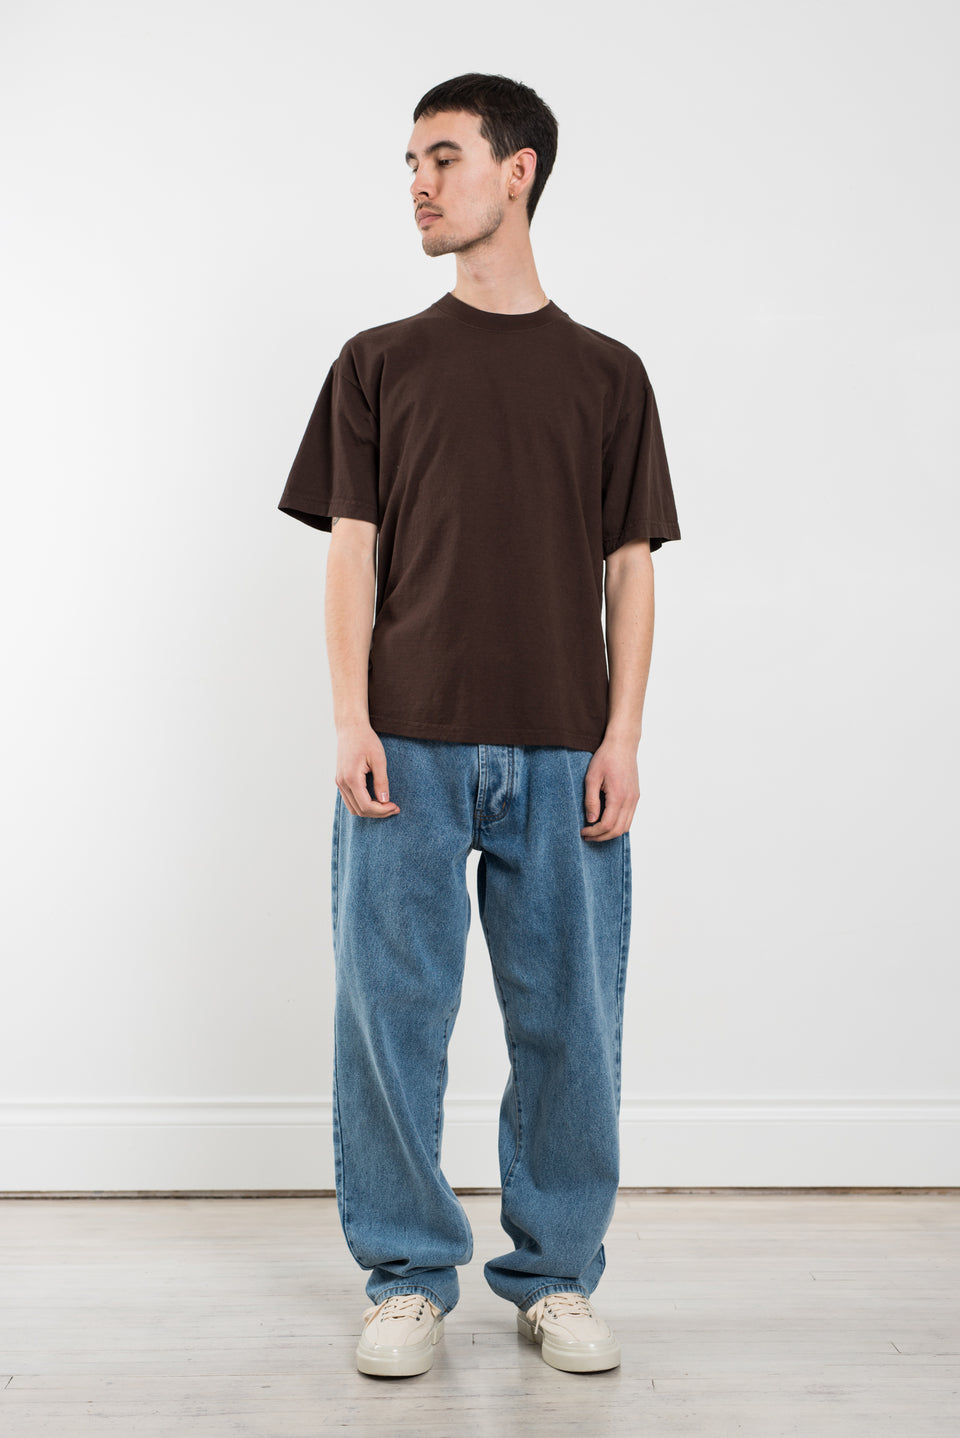 Calculuss Garment Dyed Tee Chocolate Brown Calculus Victoria BC Canada